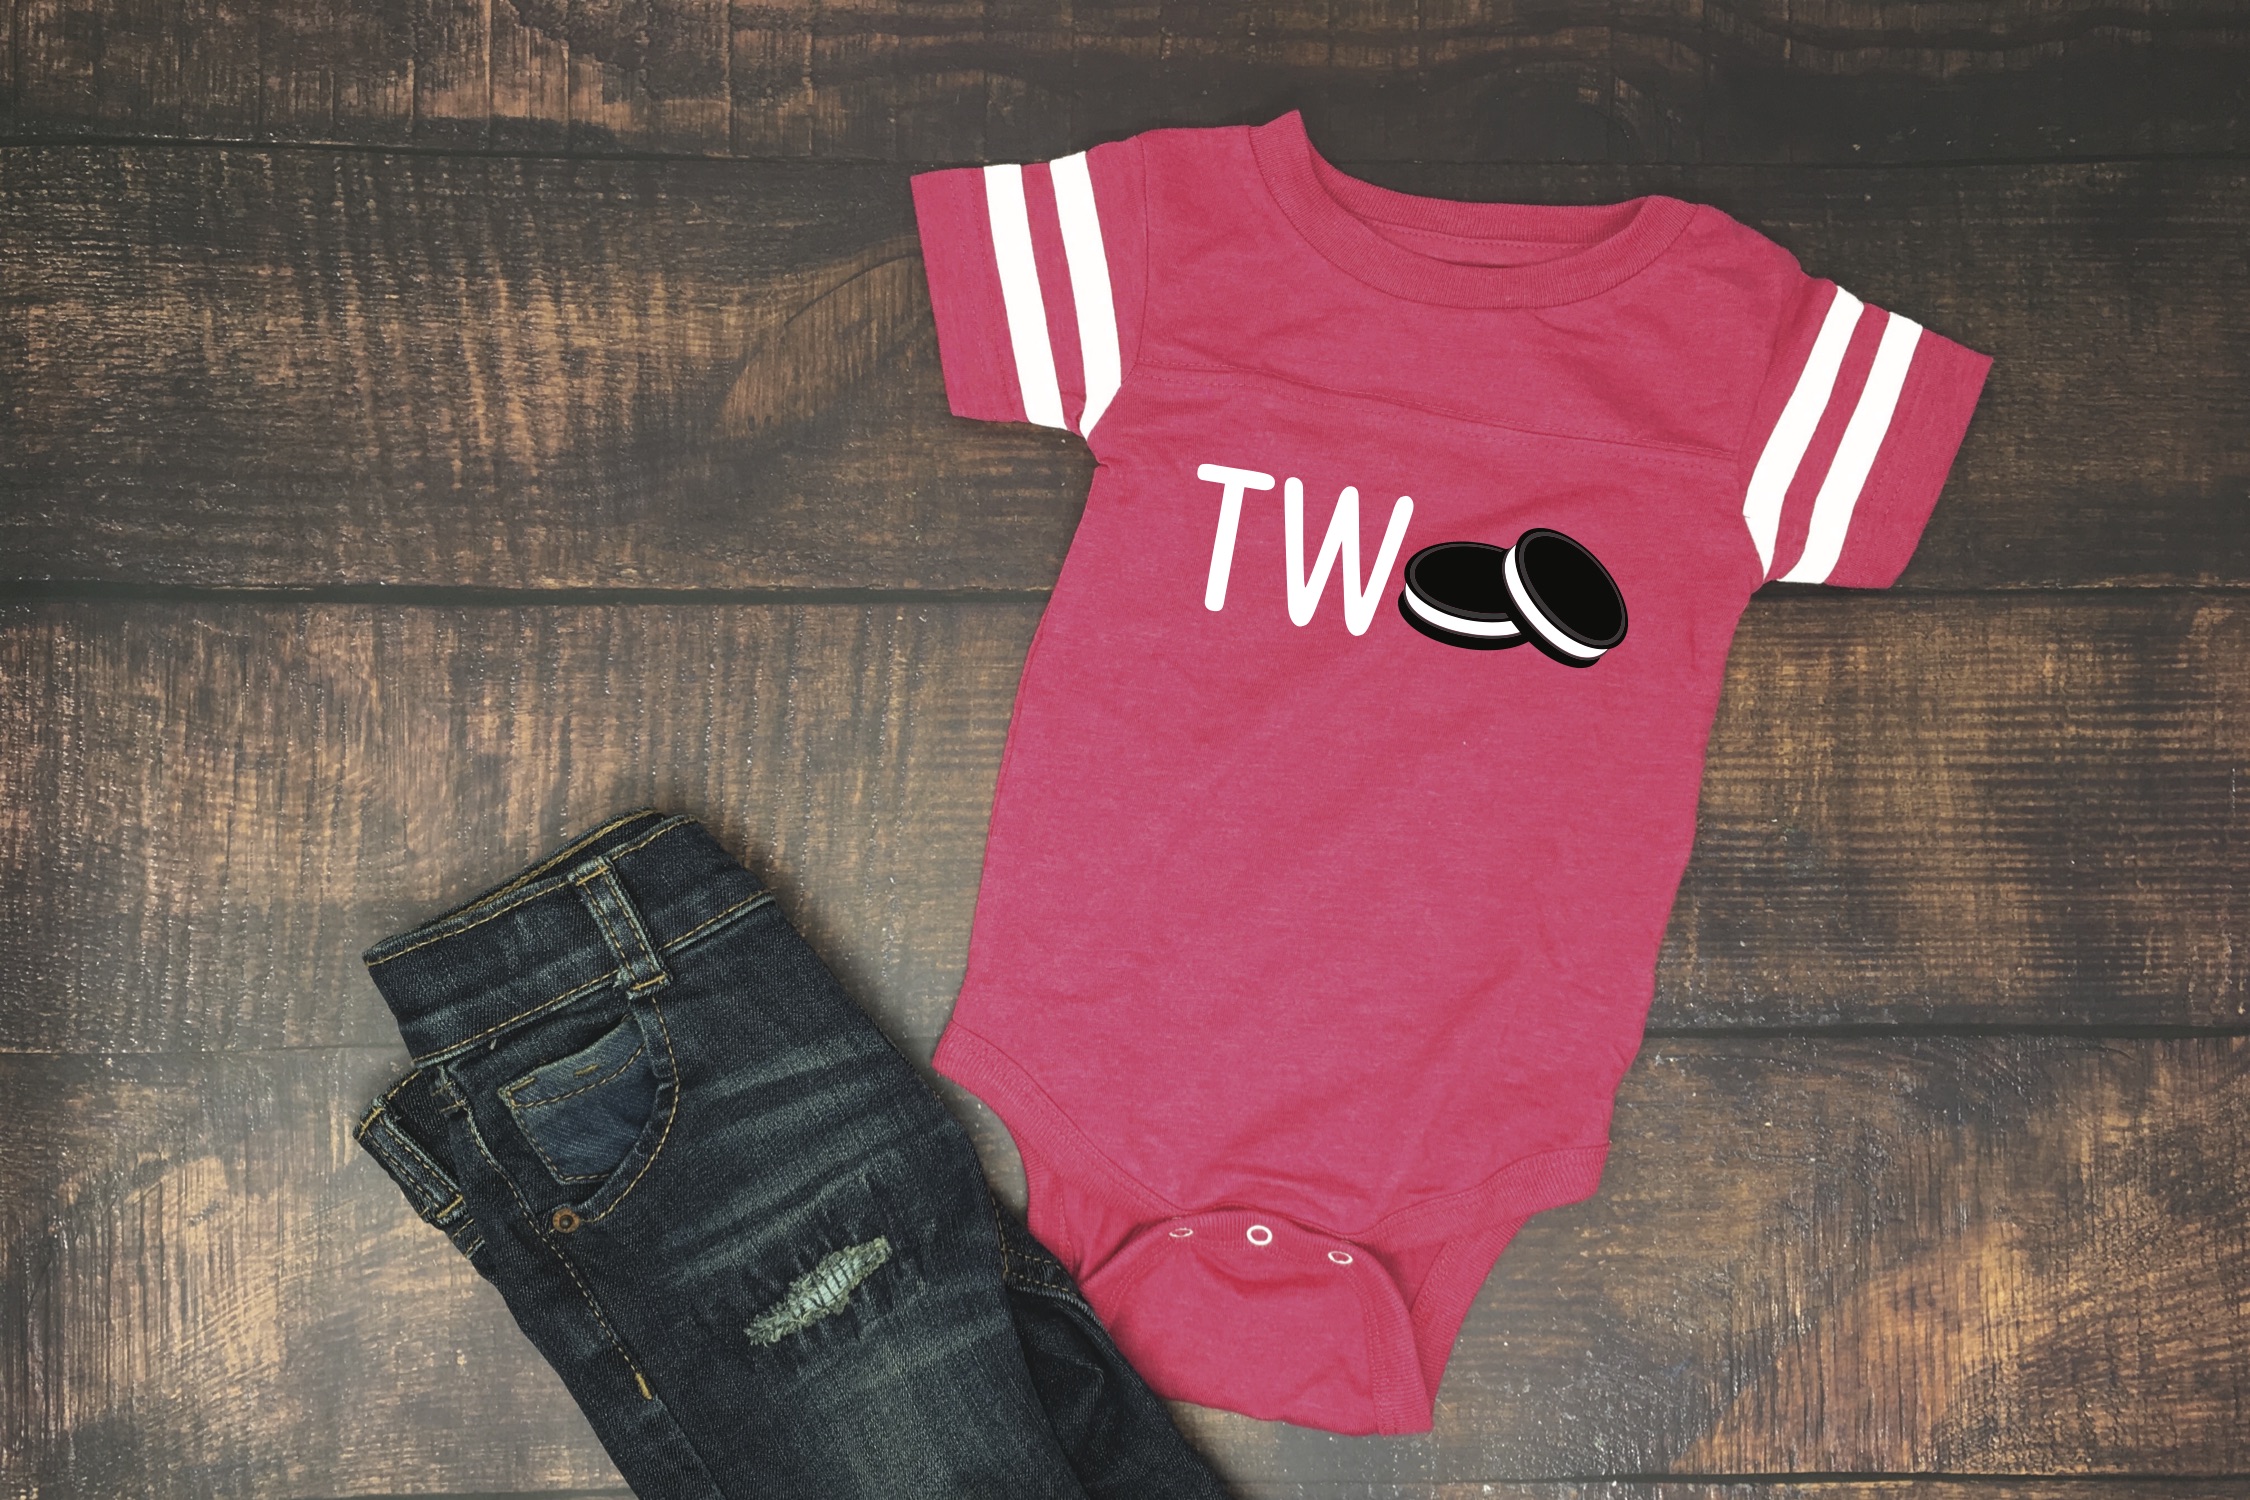 Red Toddler Two Cookie Onesie Blue Jeans